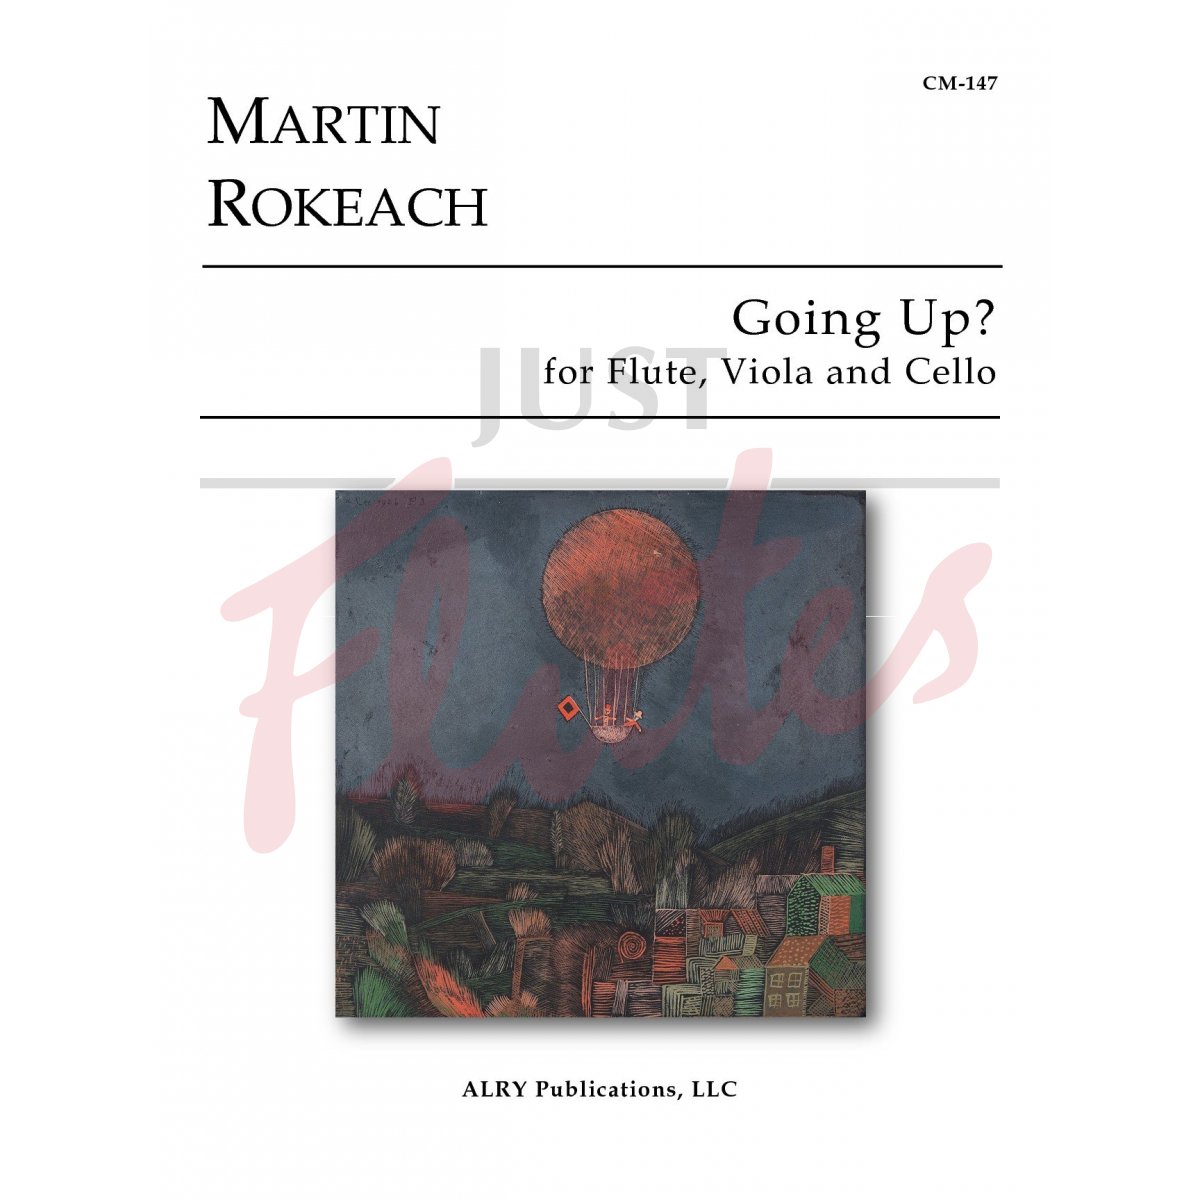 Going Up? for Flute, Viola and Cello